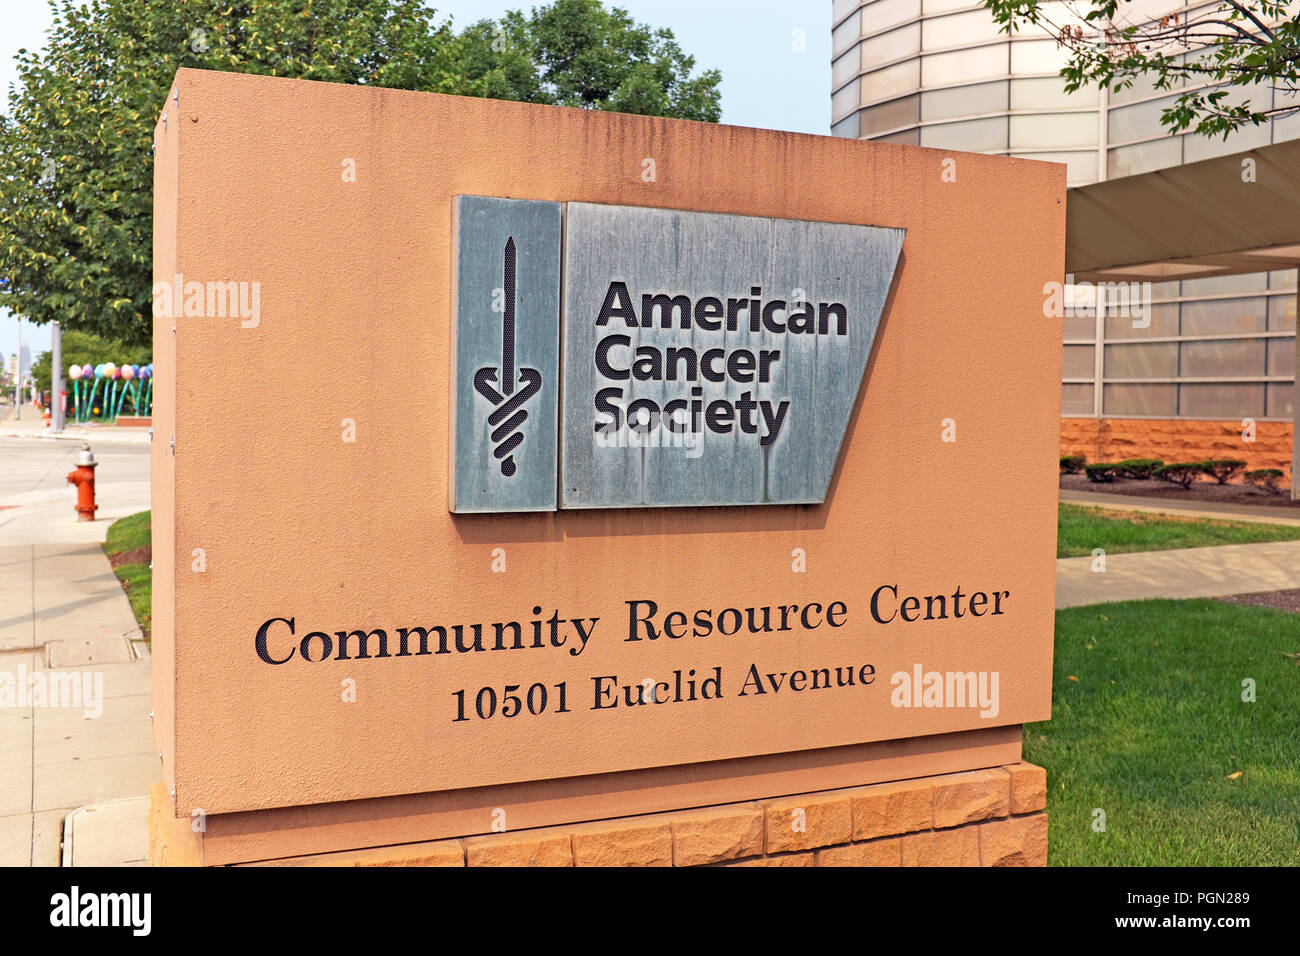 The American Cancer Society Community Resource Center in the University Circle neighborhood of Cleveland, Ohio, USA. Stock Photo